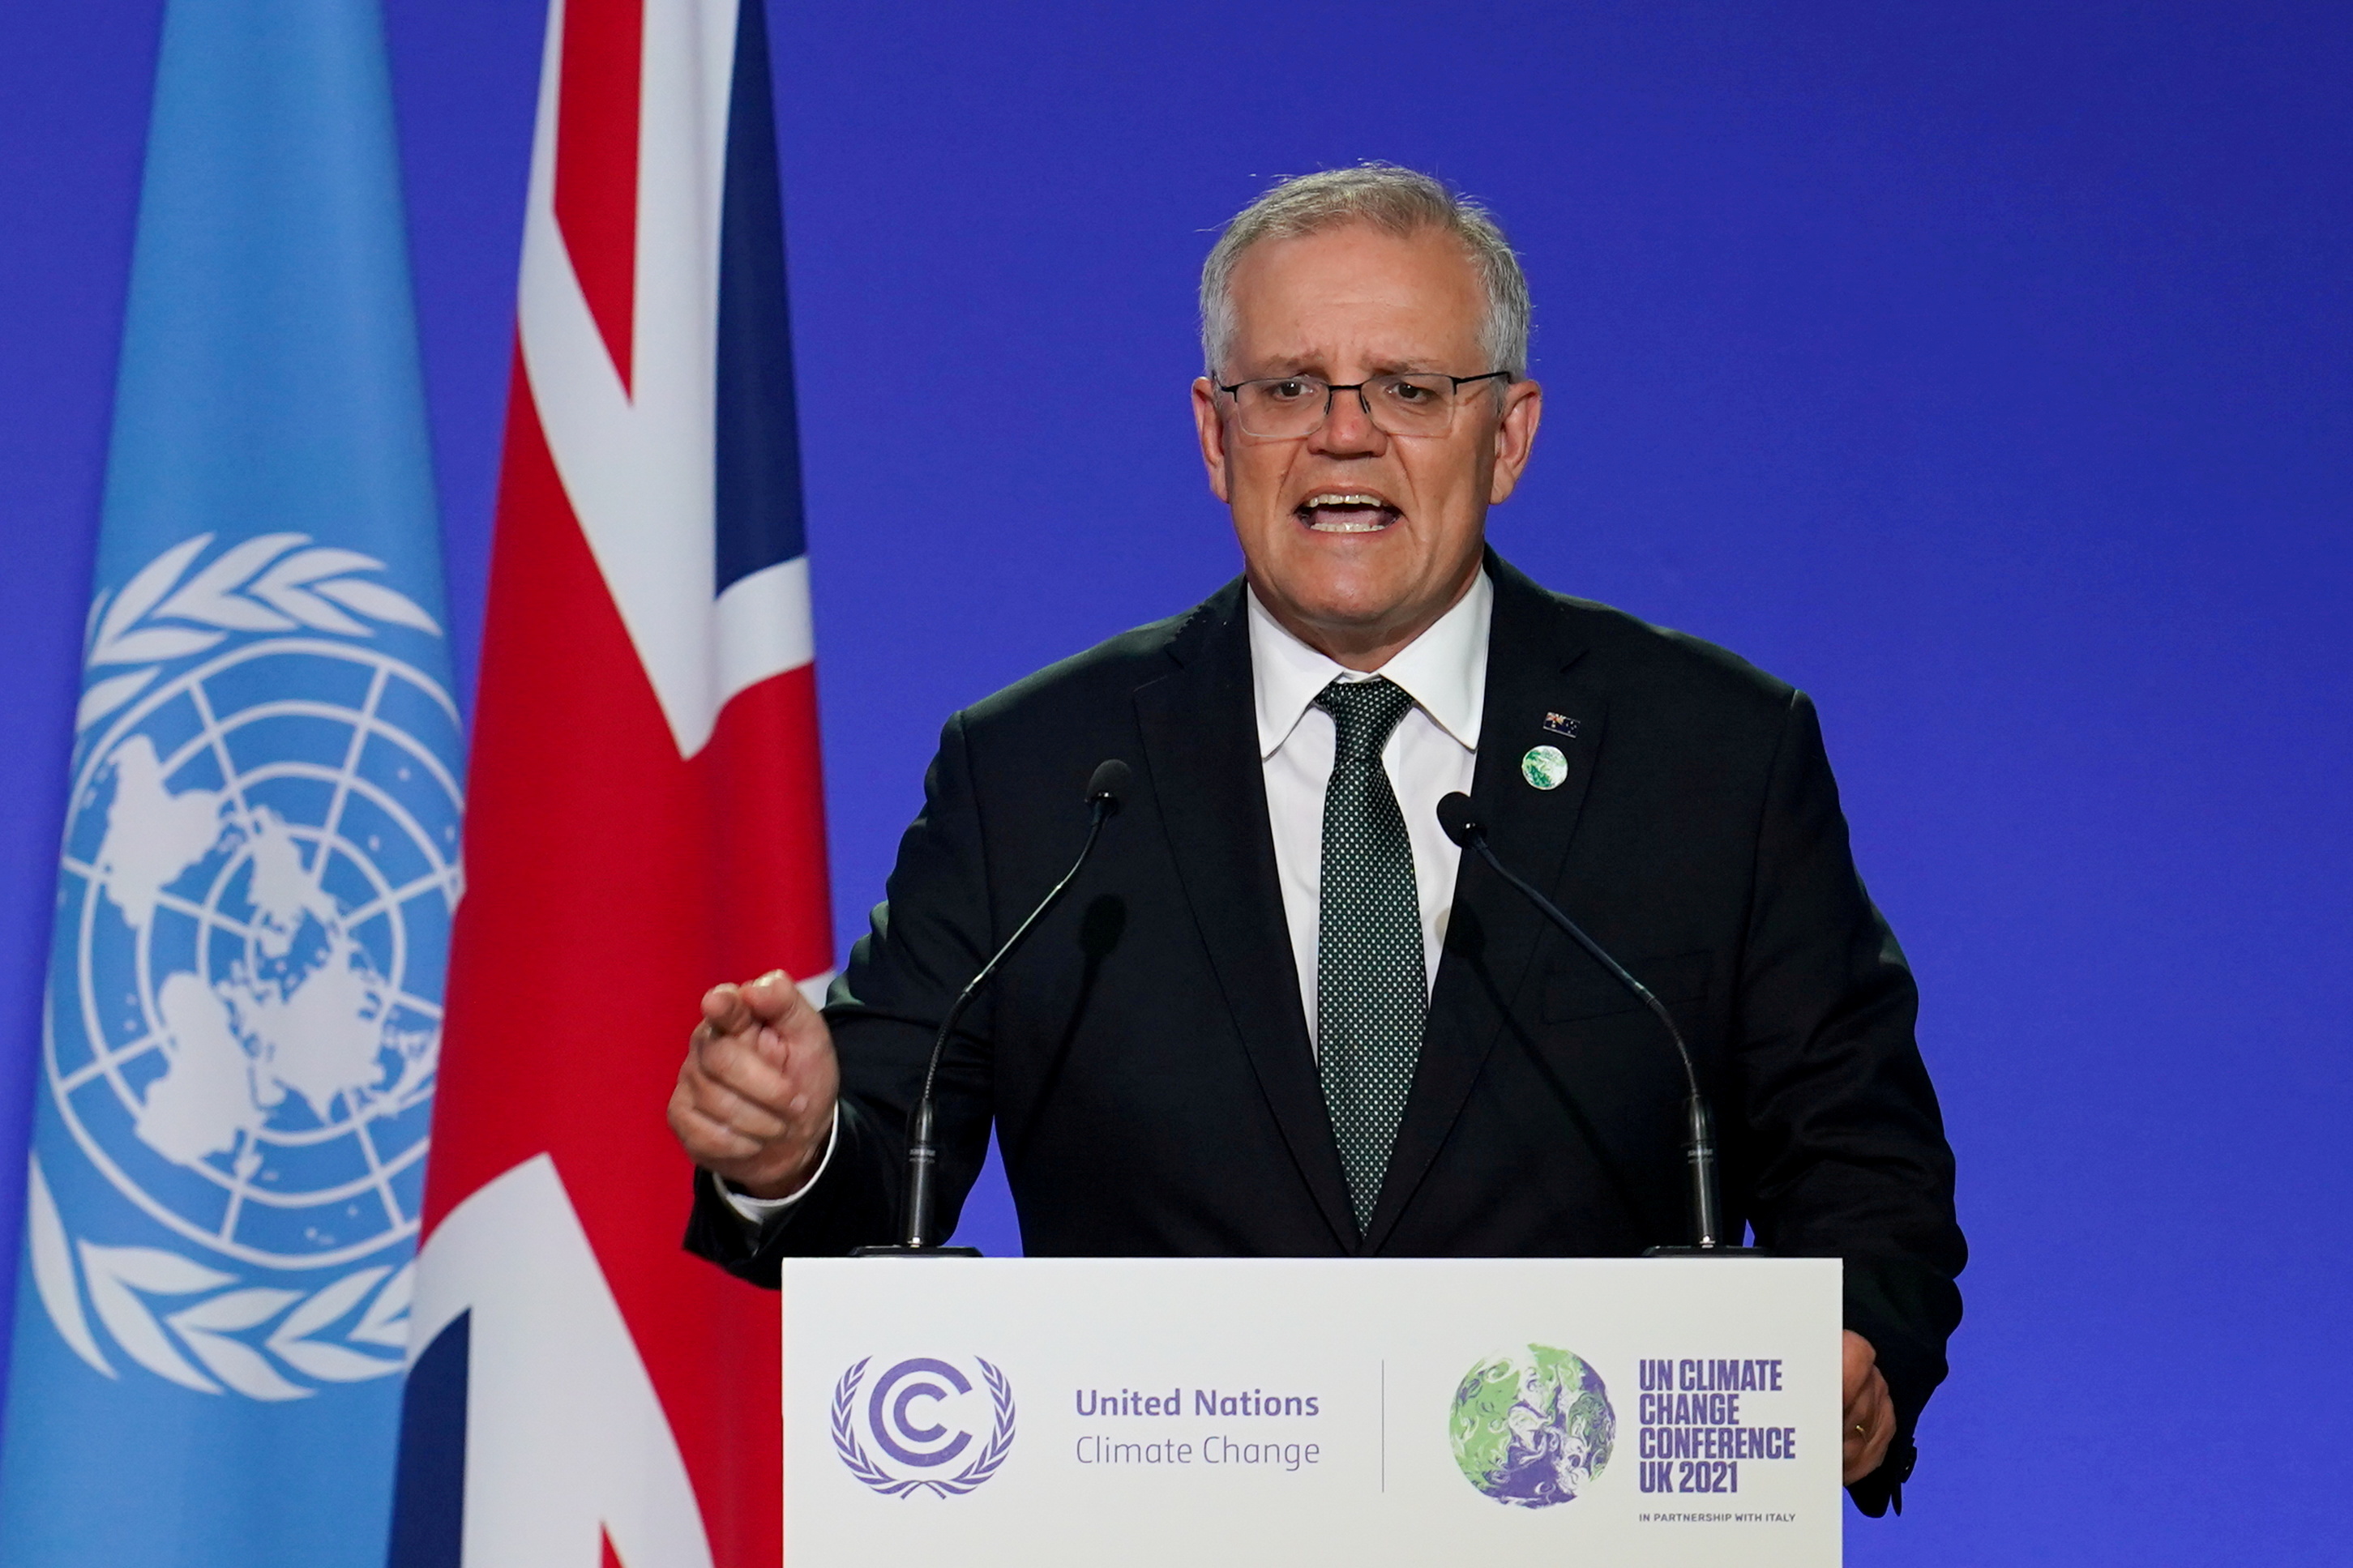 Australia's Prime Minister Scott Morrison speaks as National Statements are delivered as a part of the World Leaders' Summit at the UN Climate Change Conference (COP26) in Glasgow, Scotland, Britain November 1, 2021. Ian Forsyth/Pool via REUTERS/File Photo